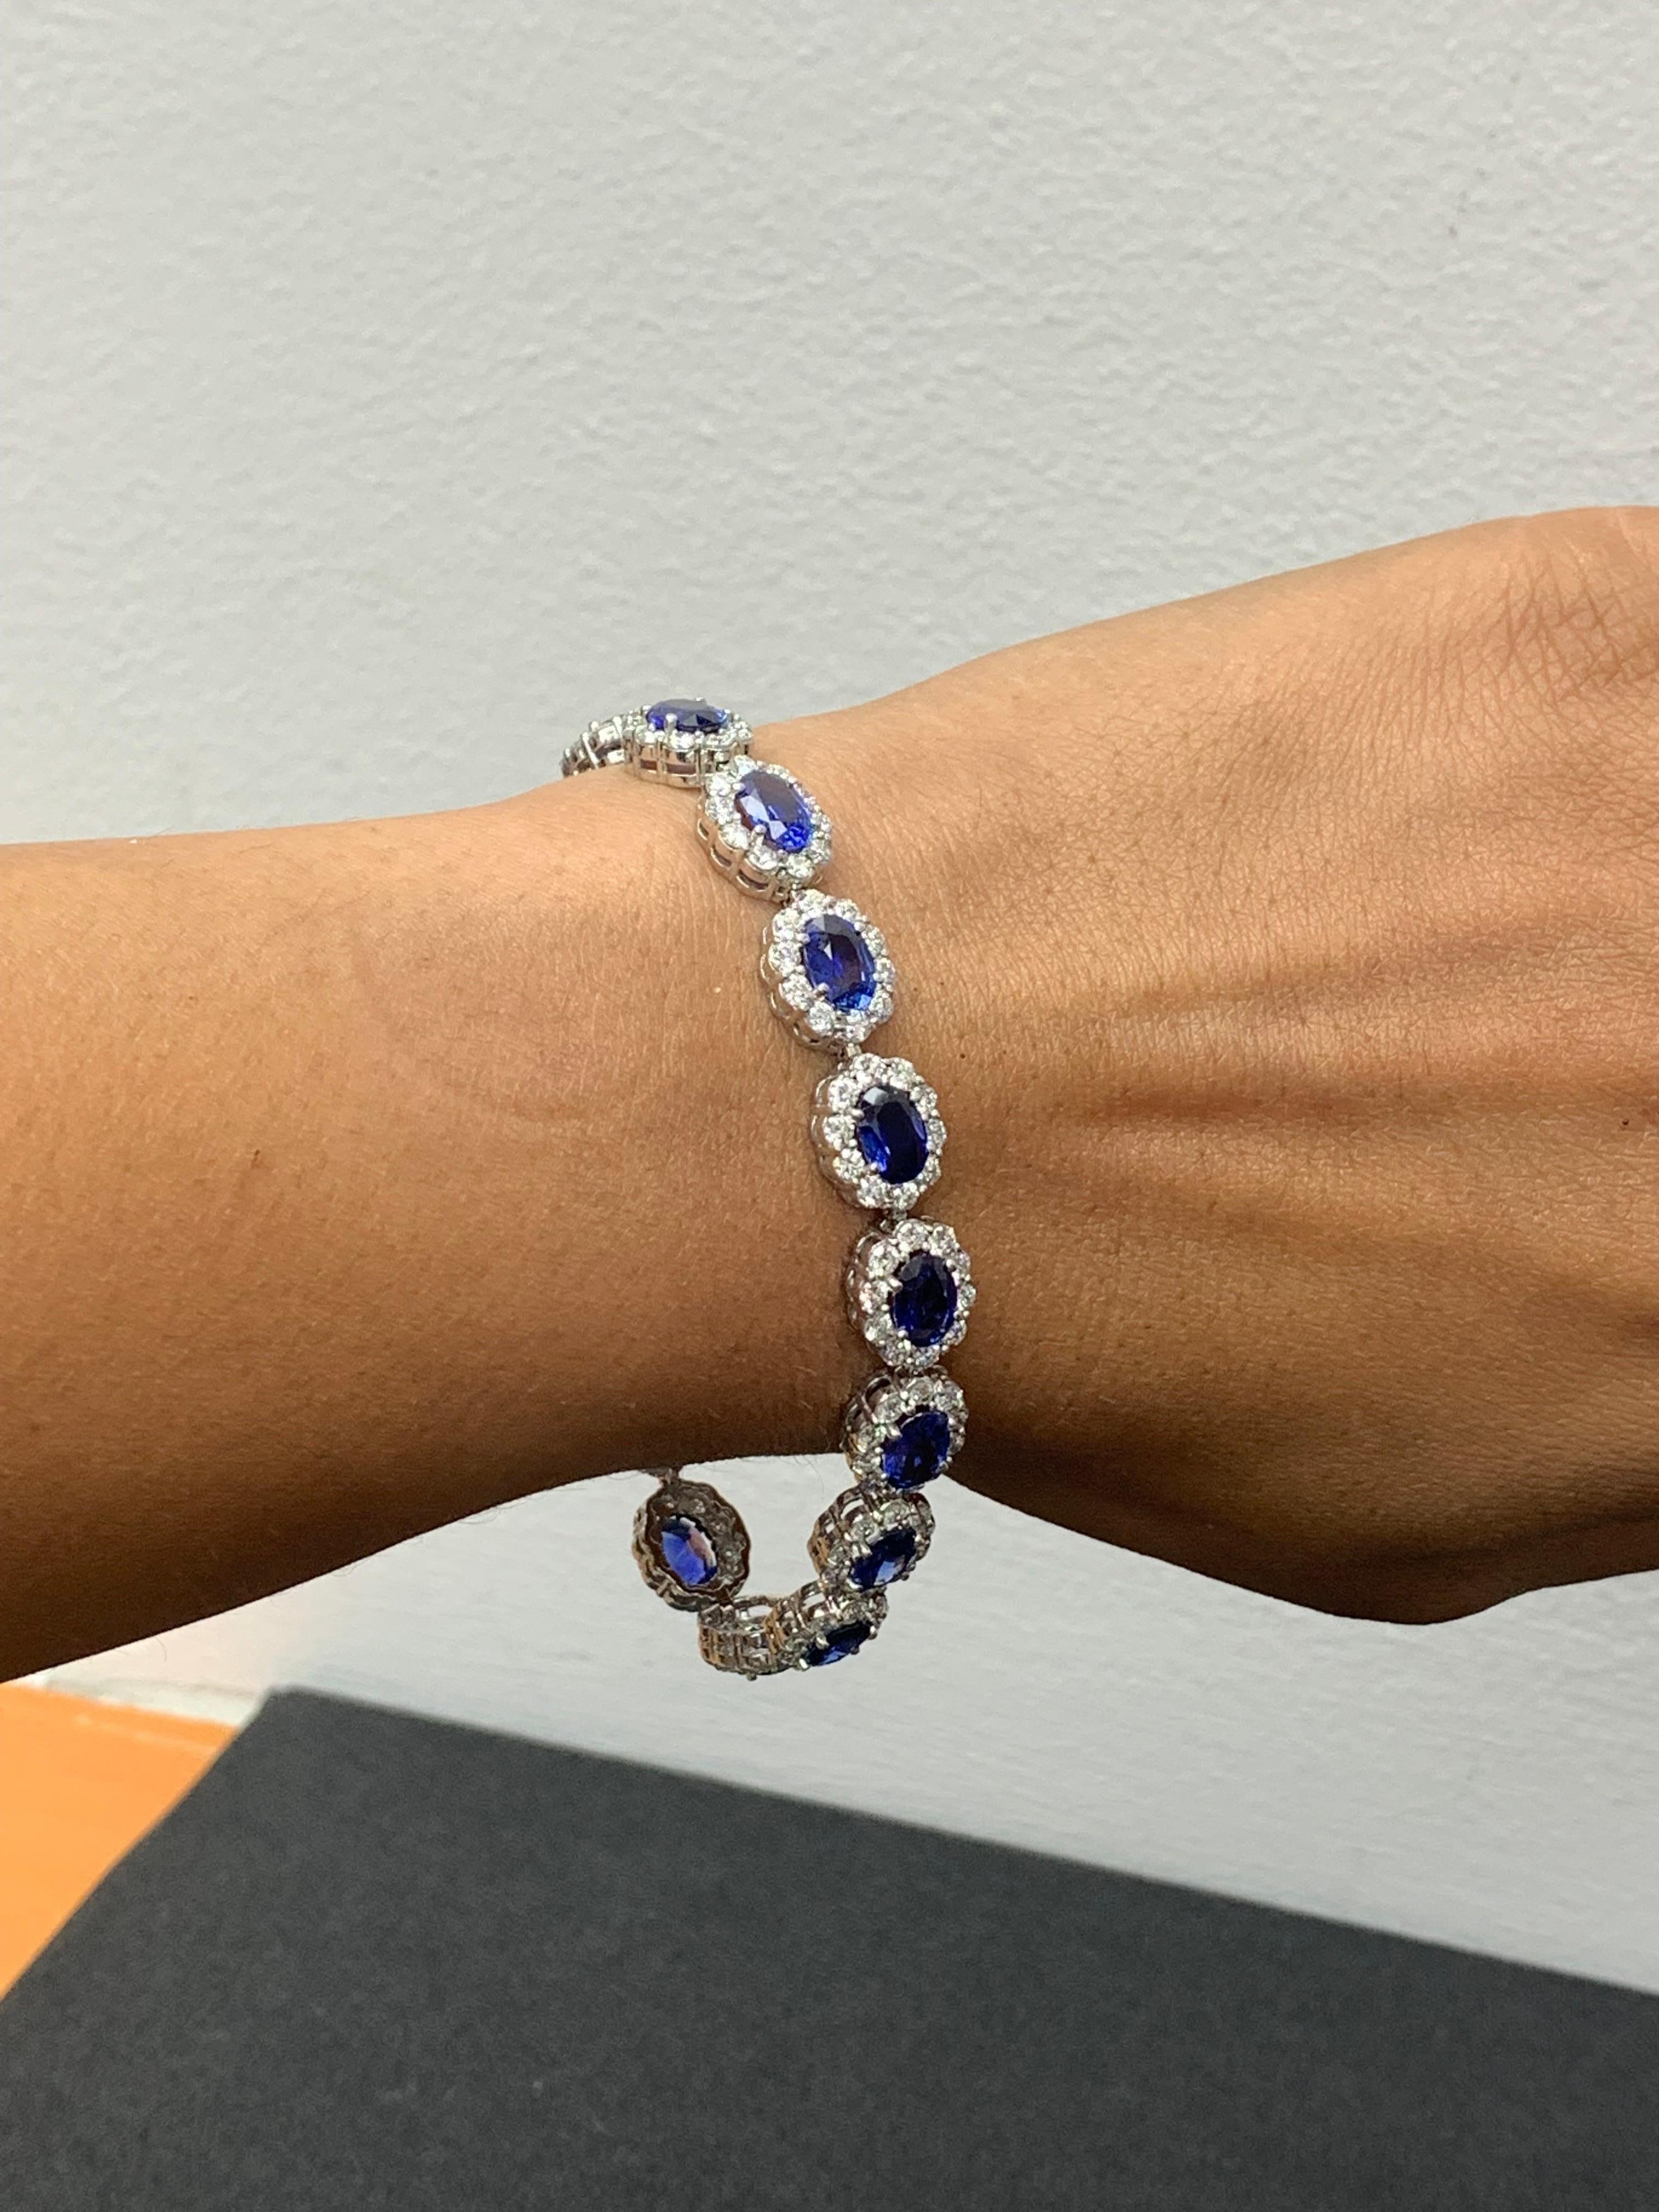 13.88 Carat Oval Cut Blue Sapphire and Diamond Halo Bracelet in 14K White Gold For Sale 4